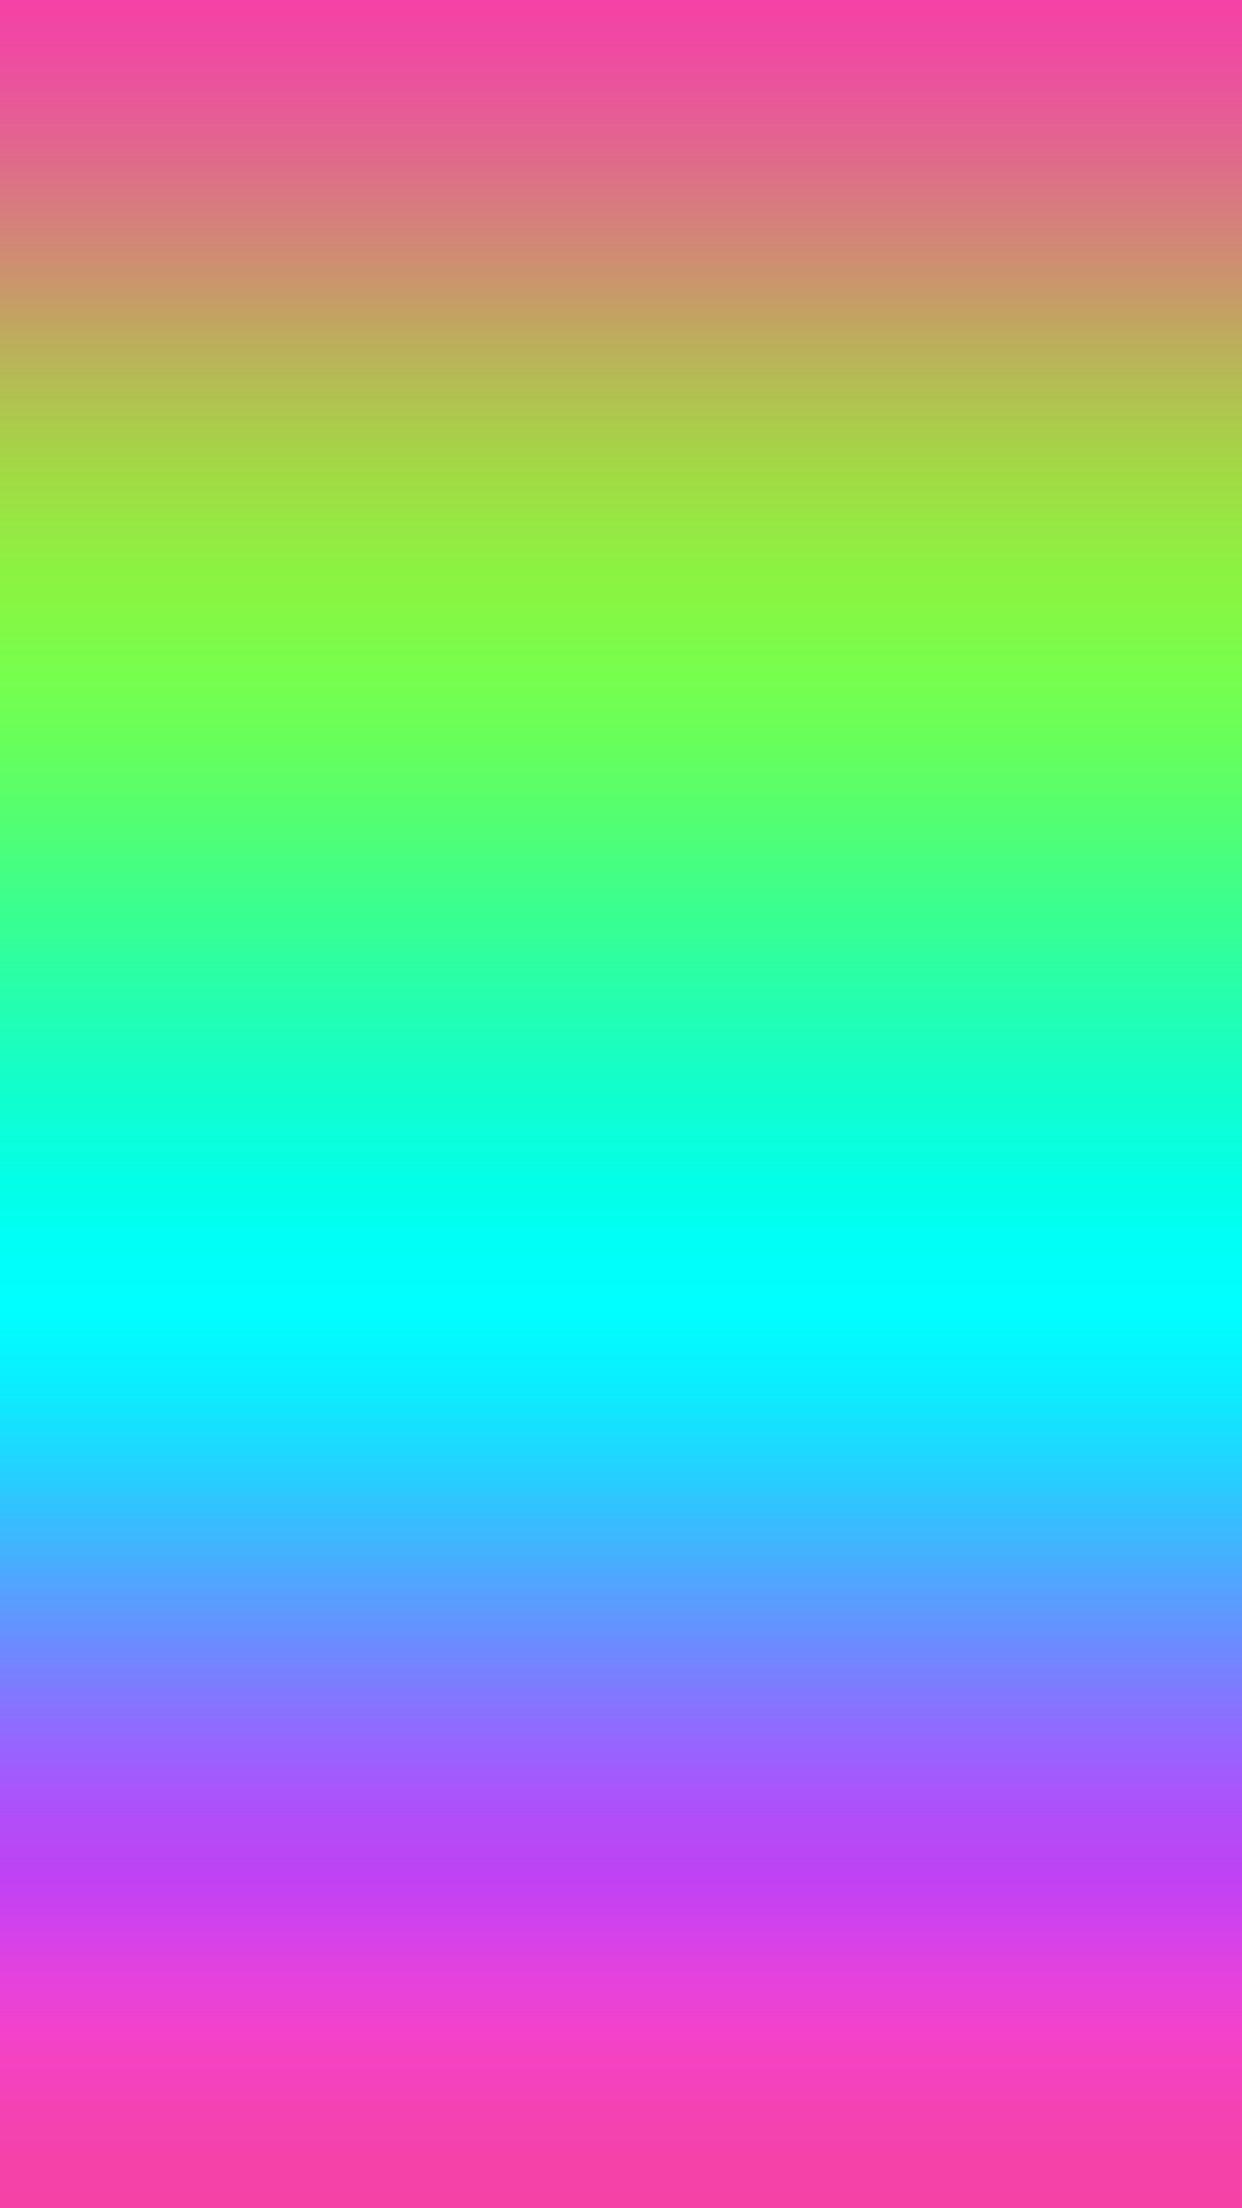 Pastel Rainbow Ombre Wallpapers - Top Free Pastel Rainbow Ombre ...